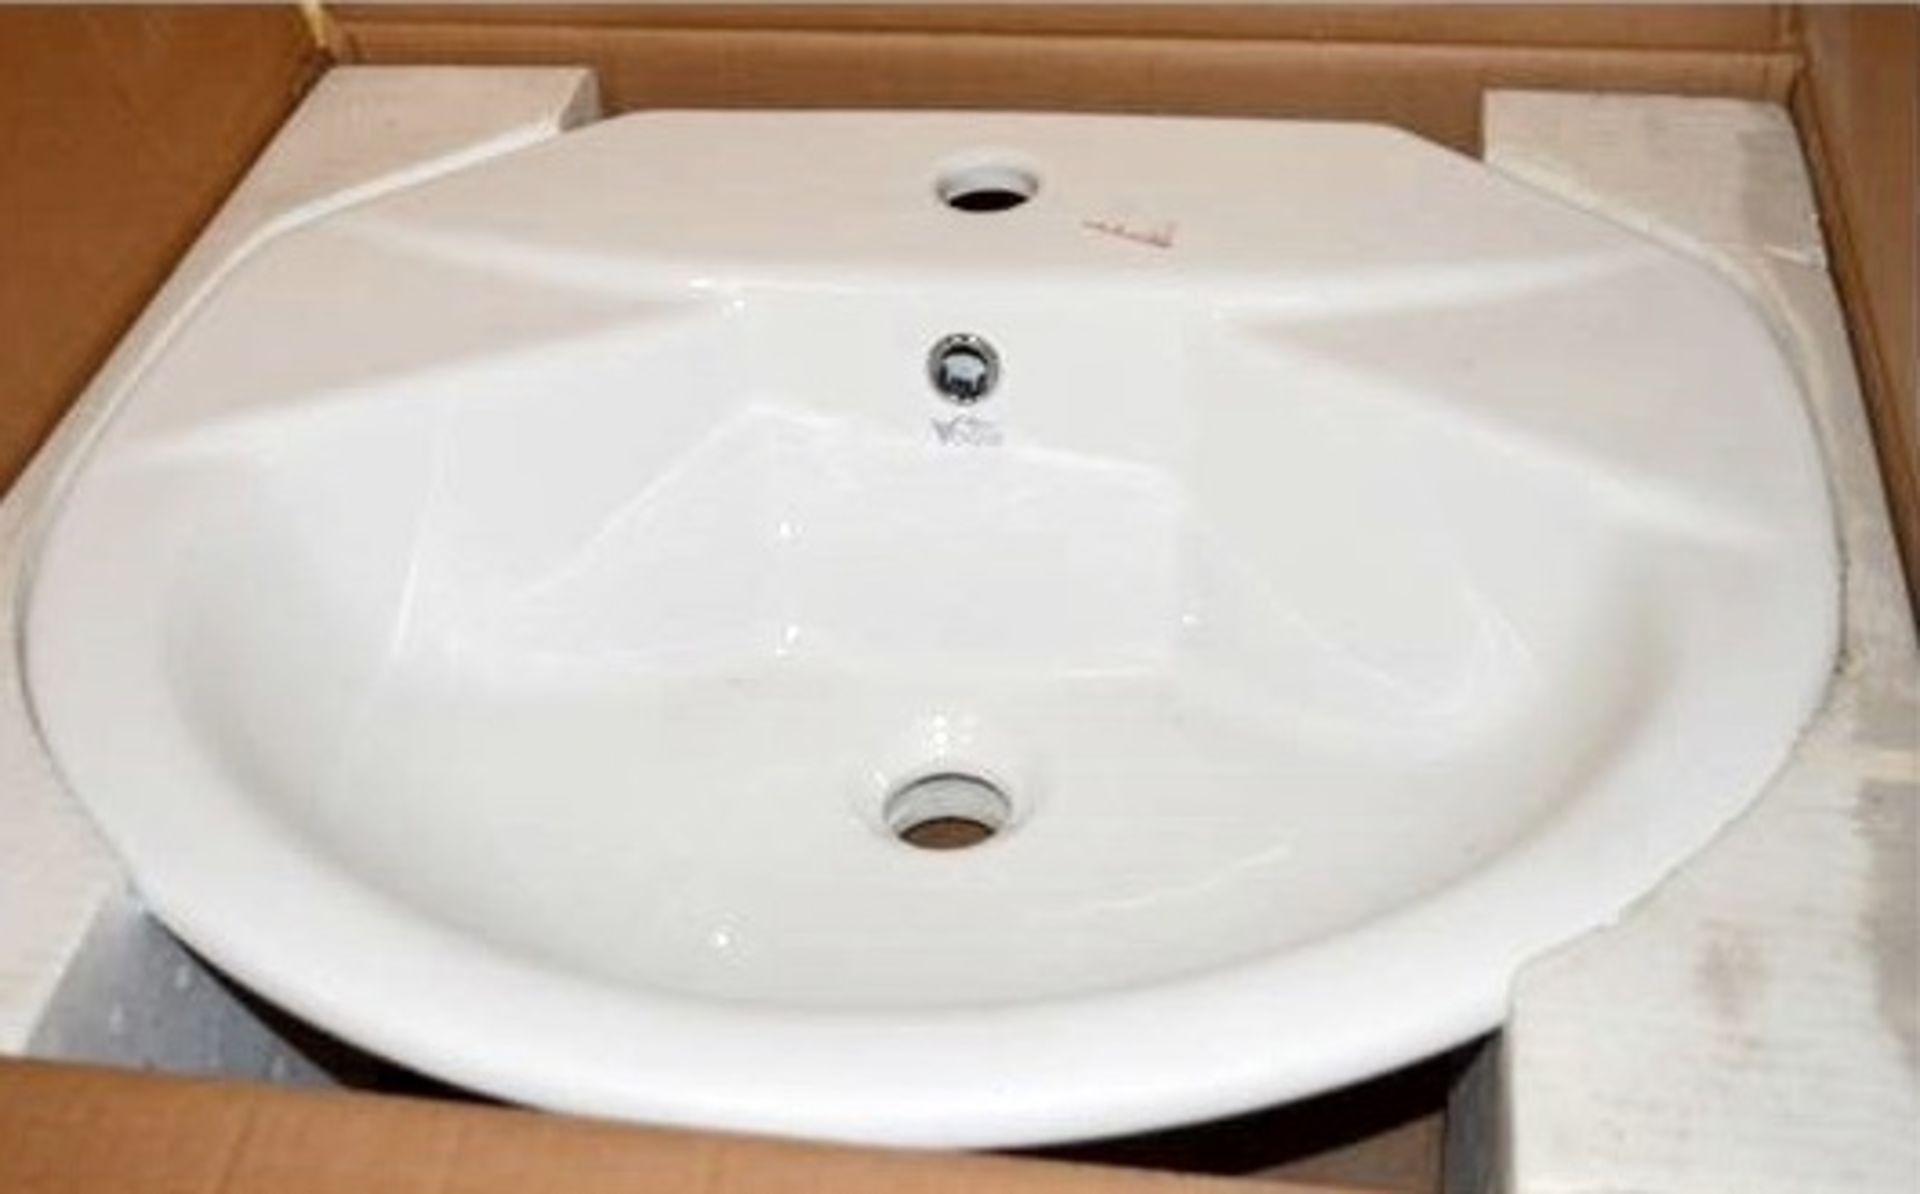 1 x Vogue Bathrooms FORMA Single Tap Hole VANITY SINK BASIN - 550 x 480mm - Product Code VCB403 -